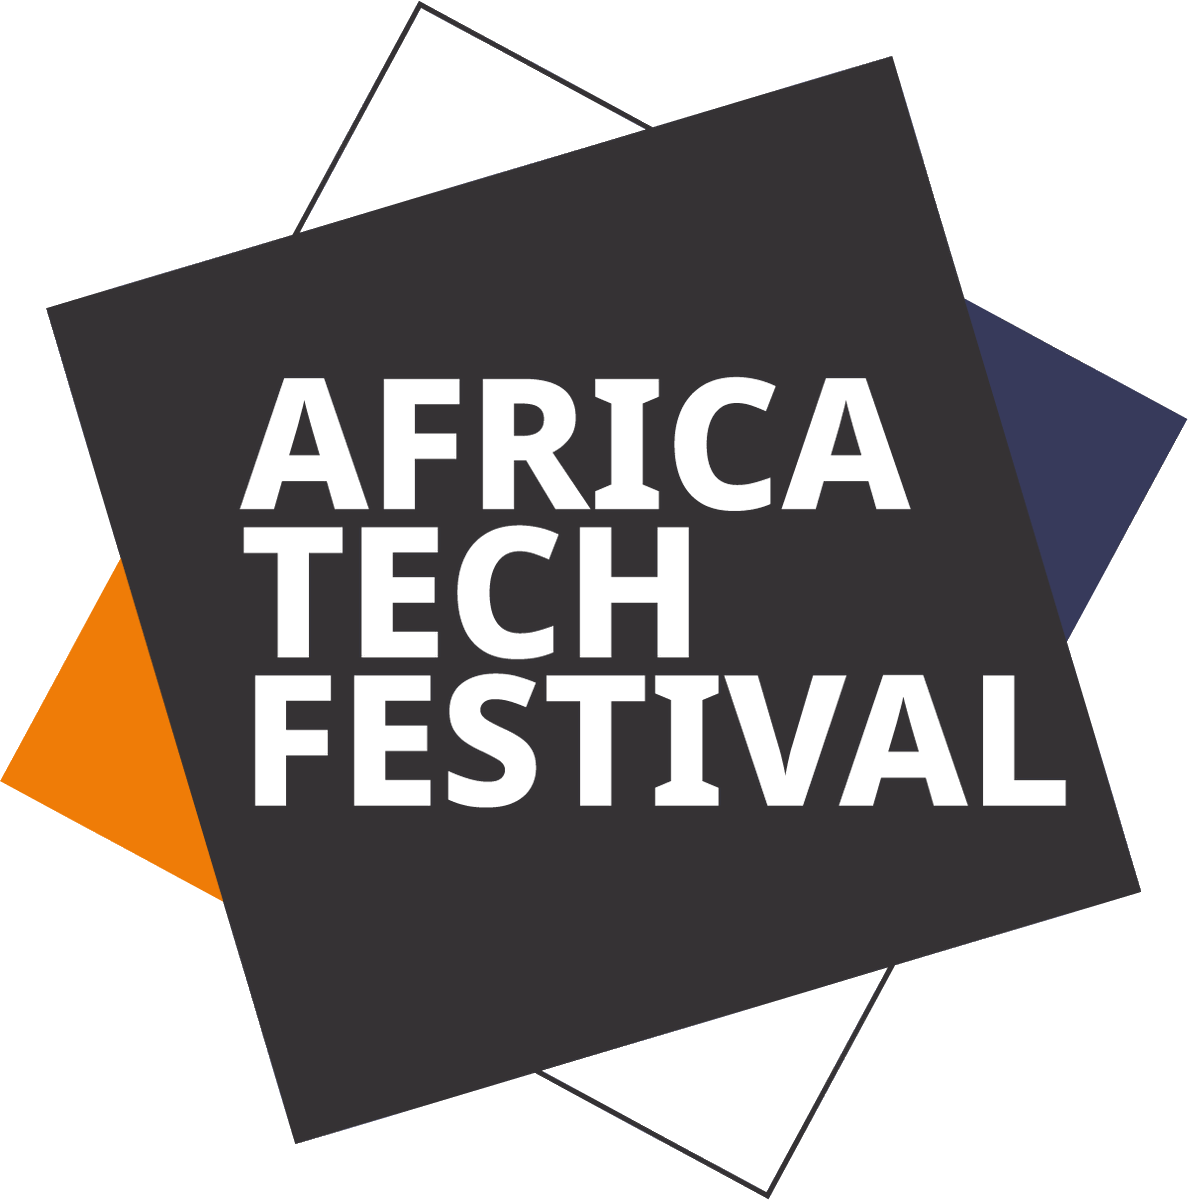 Africa Tech Festival returns to Cape Town from Nov 14-16, celebrating Africa's tech vibrancy! Join 15,000+ tech enthusiasts, explore innovation, and boost Africa's digital transformation. Book your seats now:bit.ly/460IcKb #ATF2023 #Africatechfestival #CapeTown